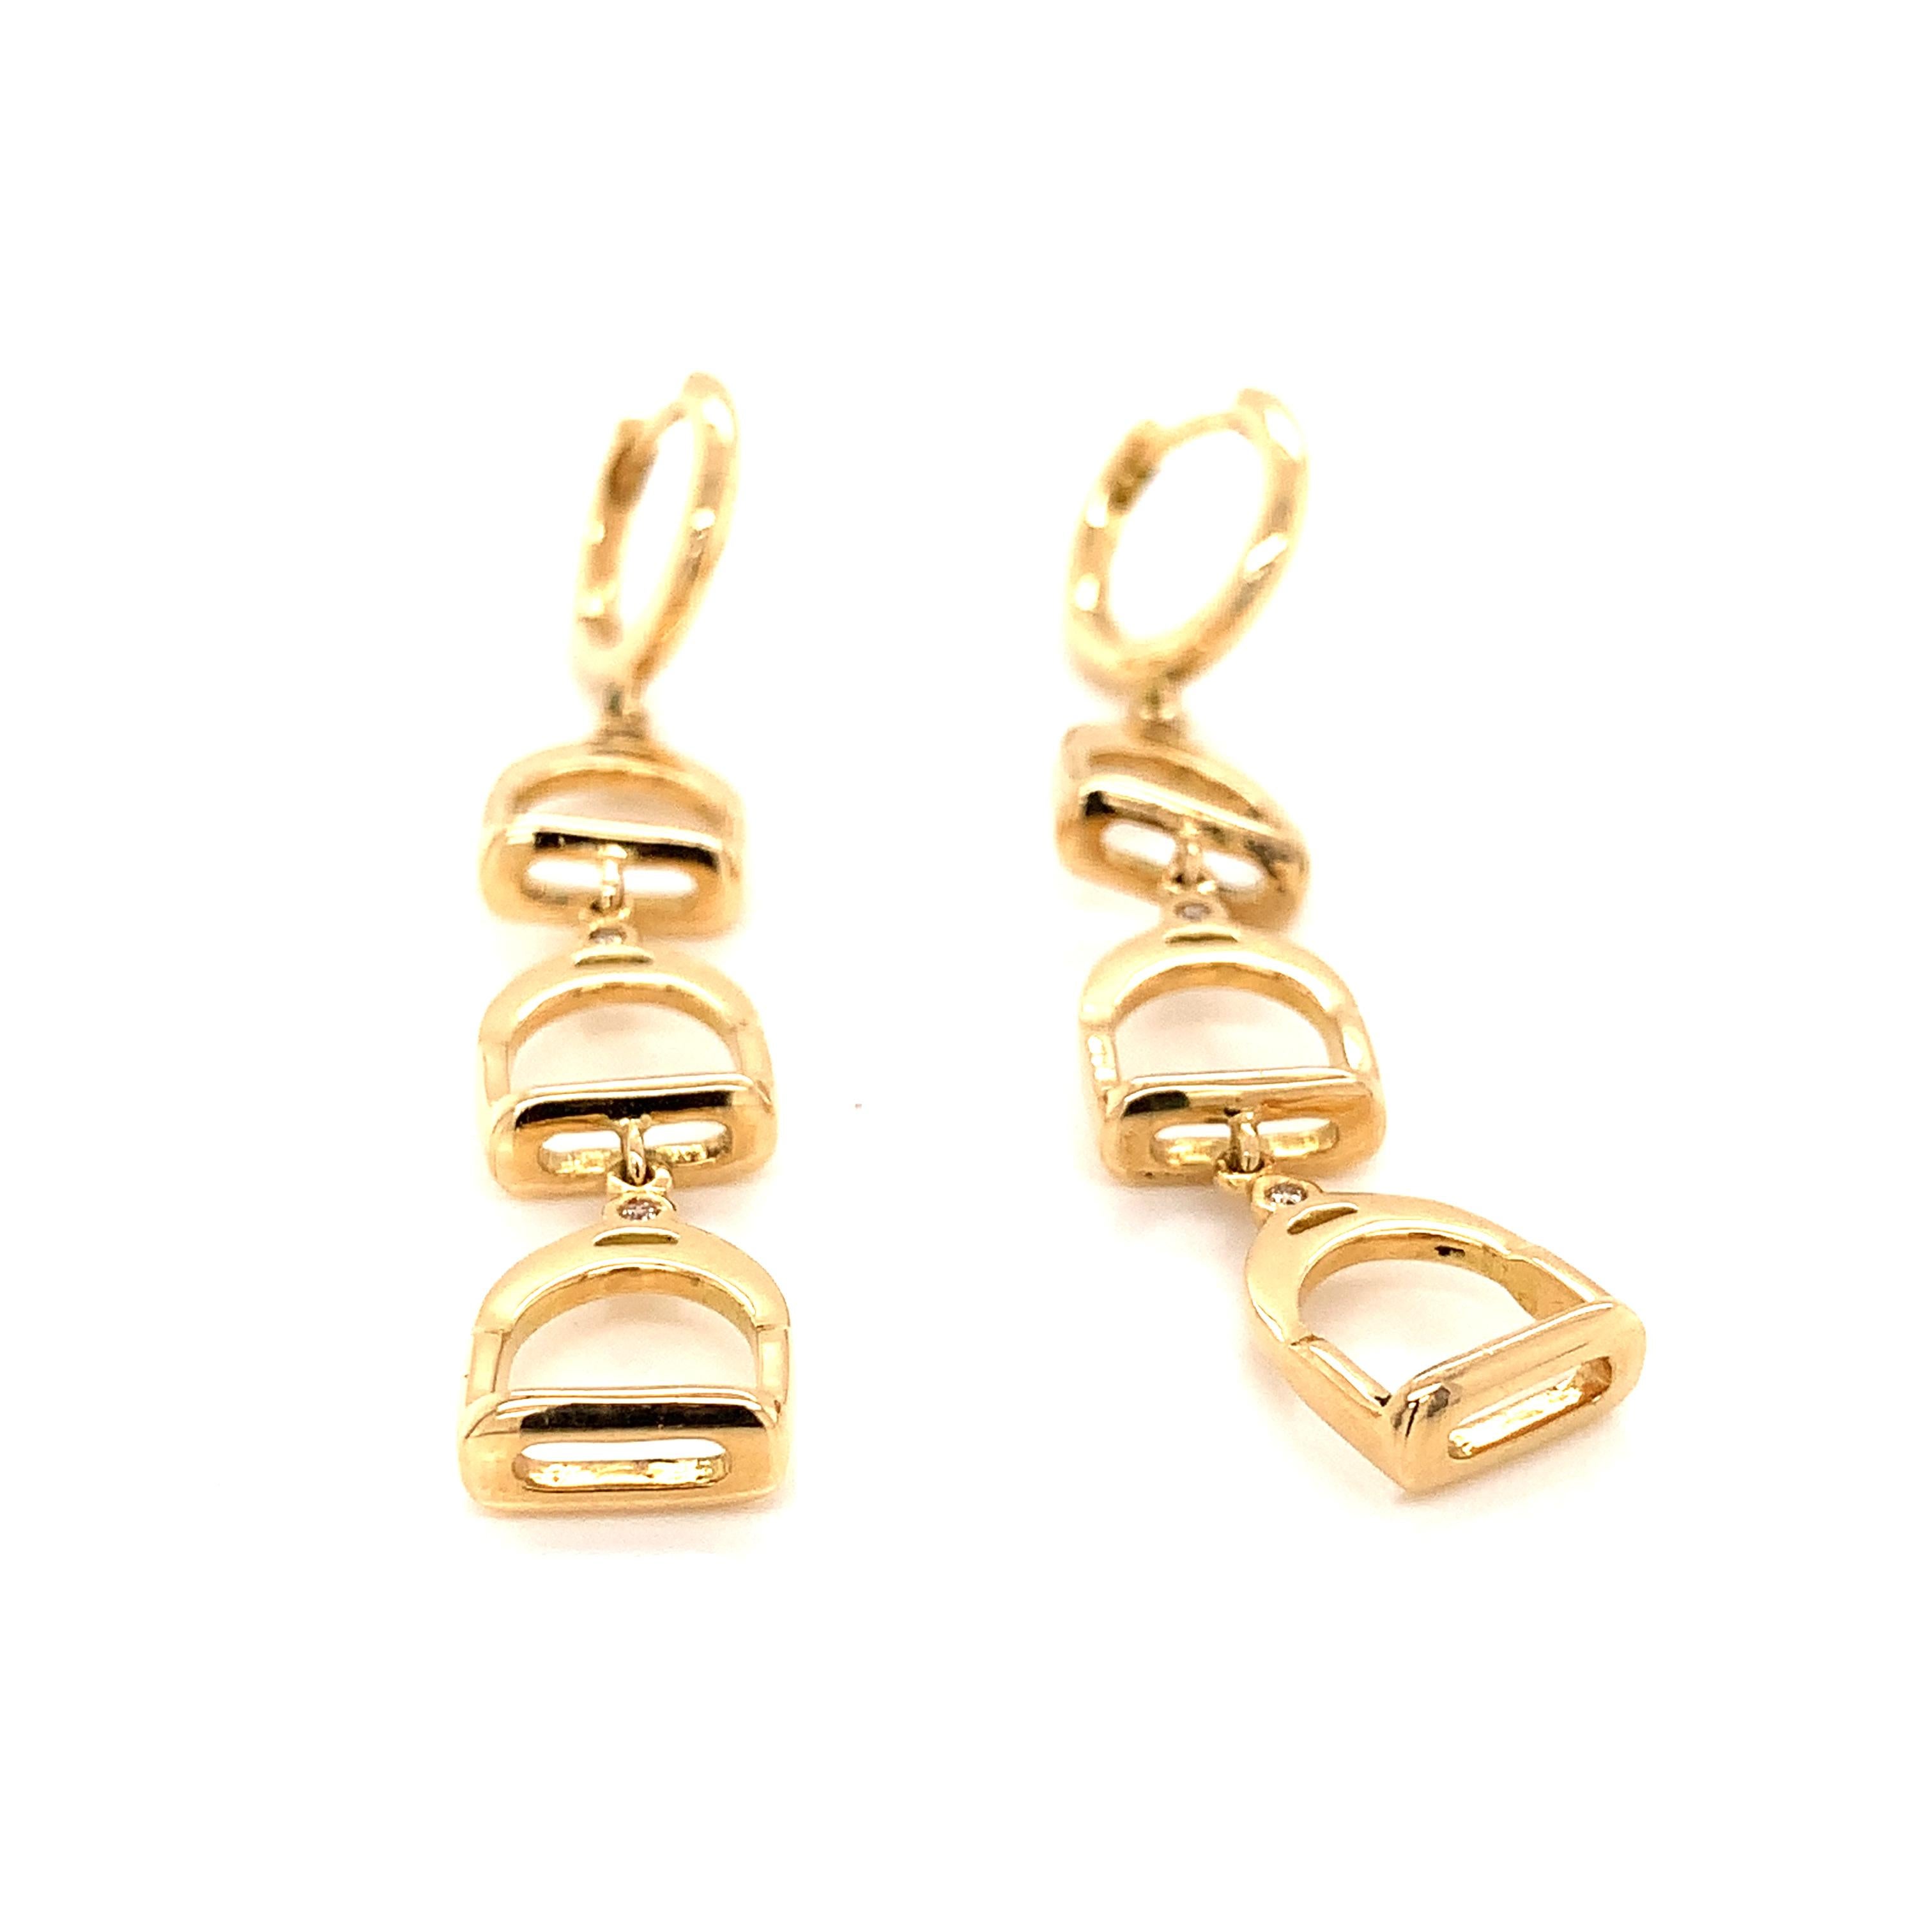 Garavelli 18 Karat Yellow Gold  Dangling Earrings from Staffe Collection, featuring diamonds accents. Made in Valenza, Italy
Each stirrup is 15mm tall and have one diamond.
Total earrings length mm 60 
18kt YELLOW GOLD  : gr 9.90
Brown diamonds ct